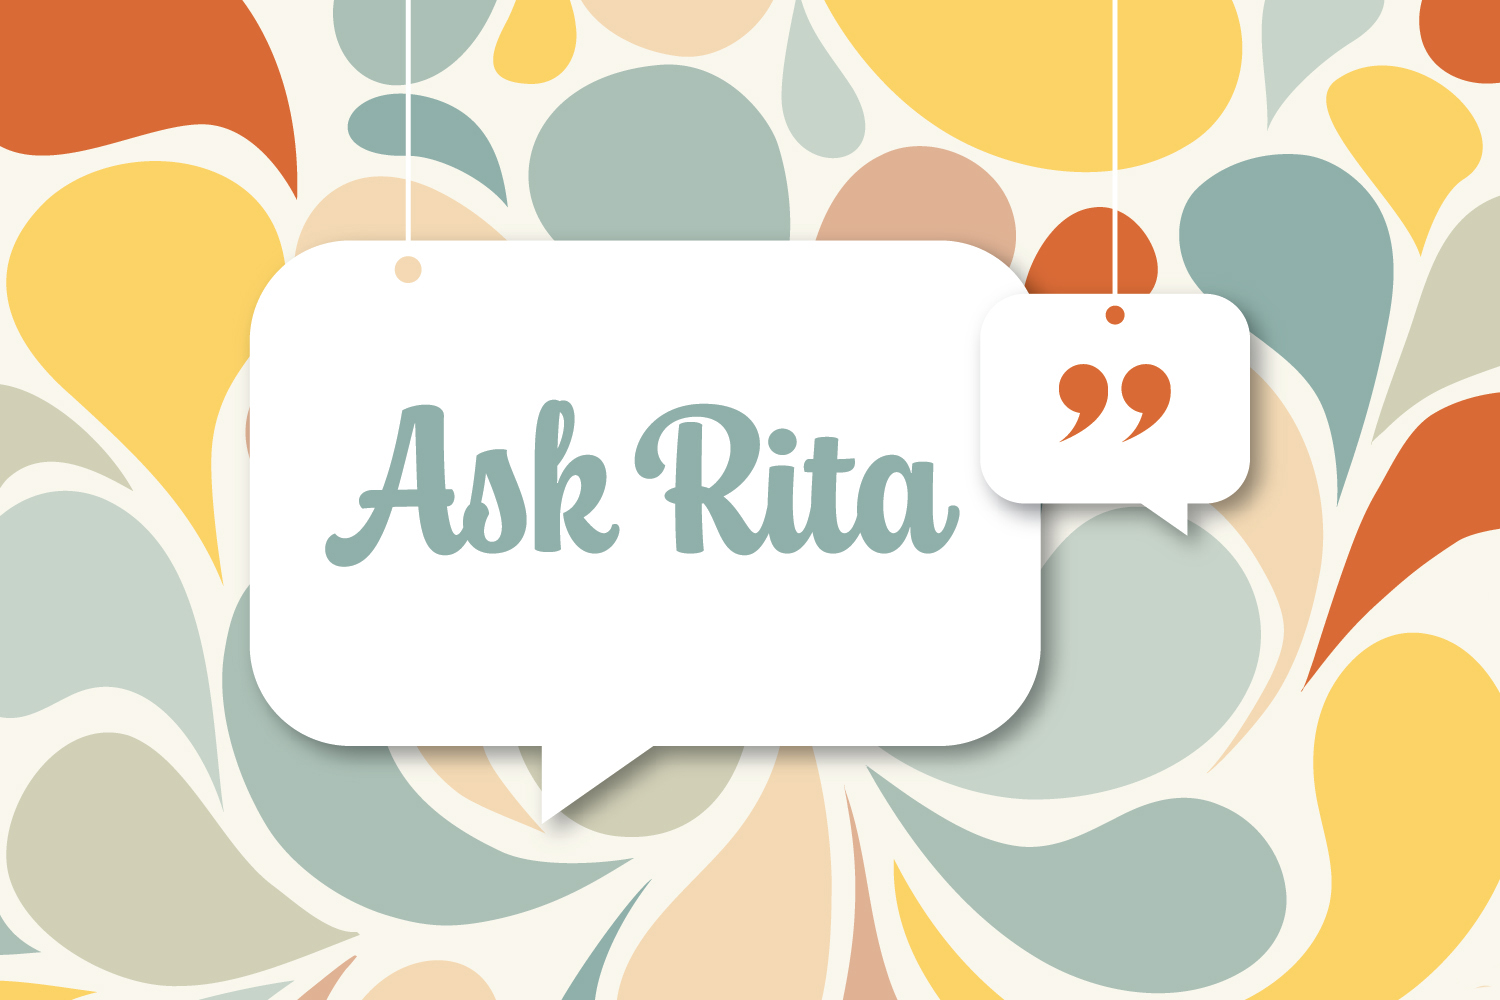 Ask Rita: Terminate Employee After One Year of Sick Leave?